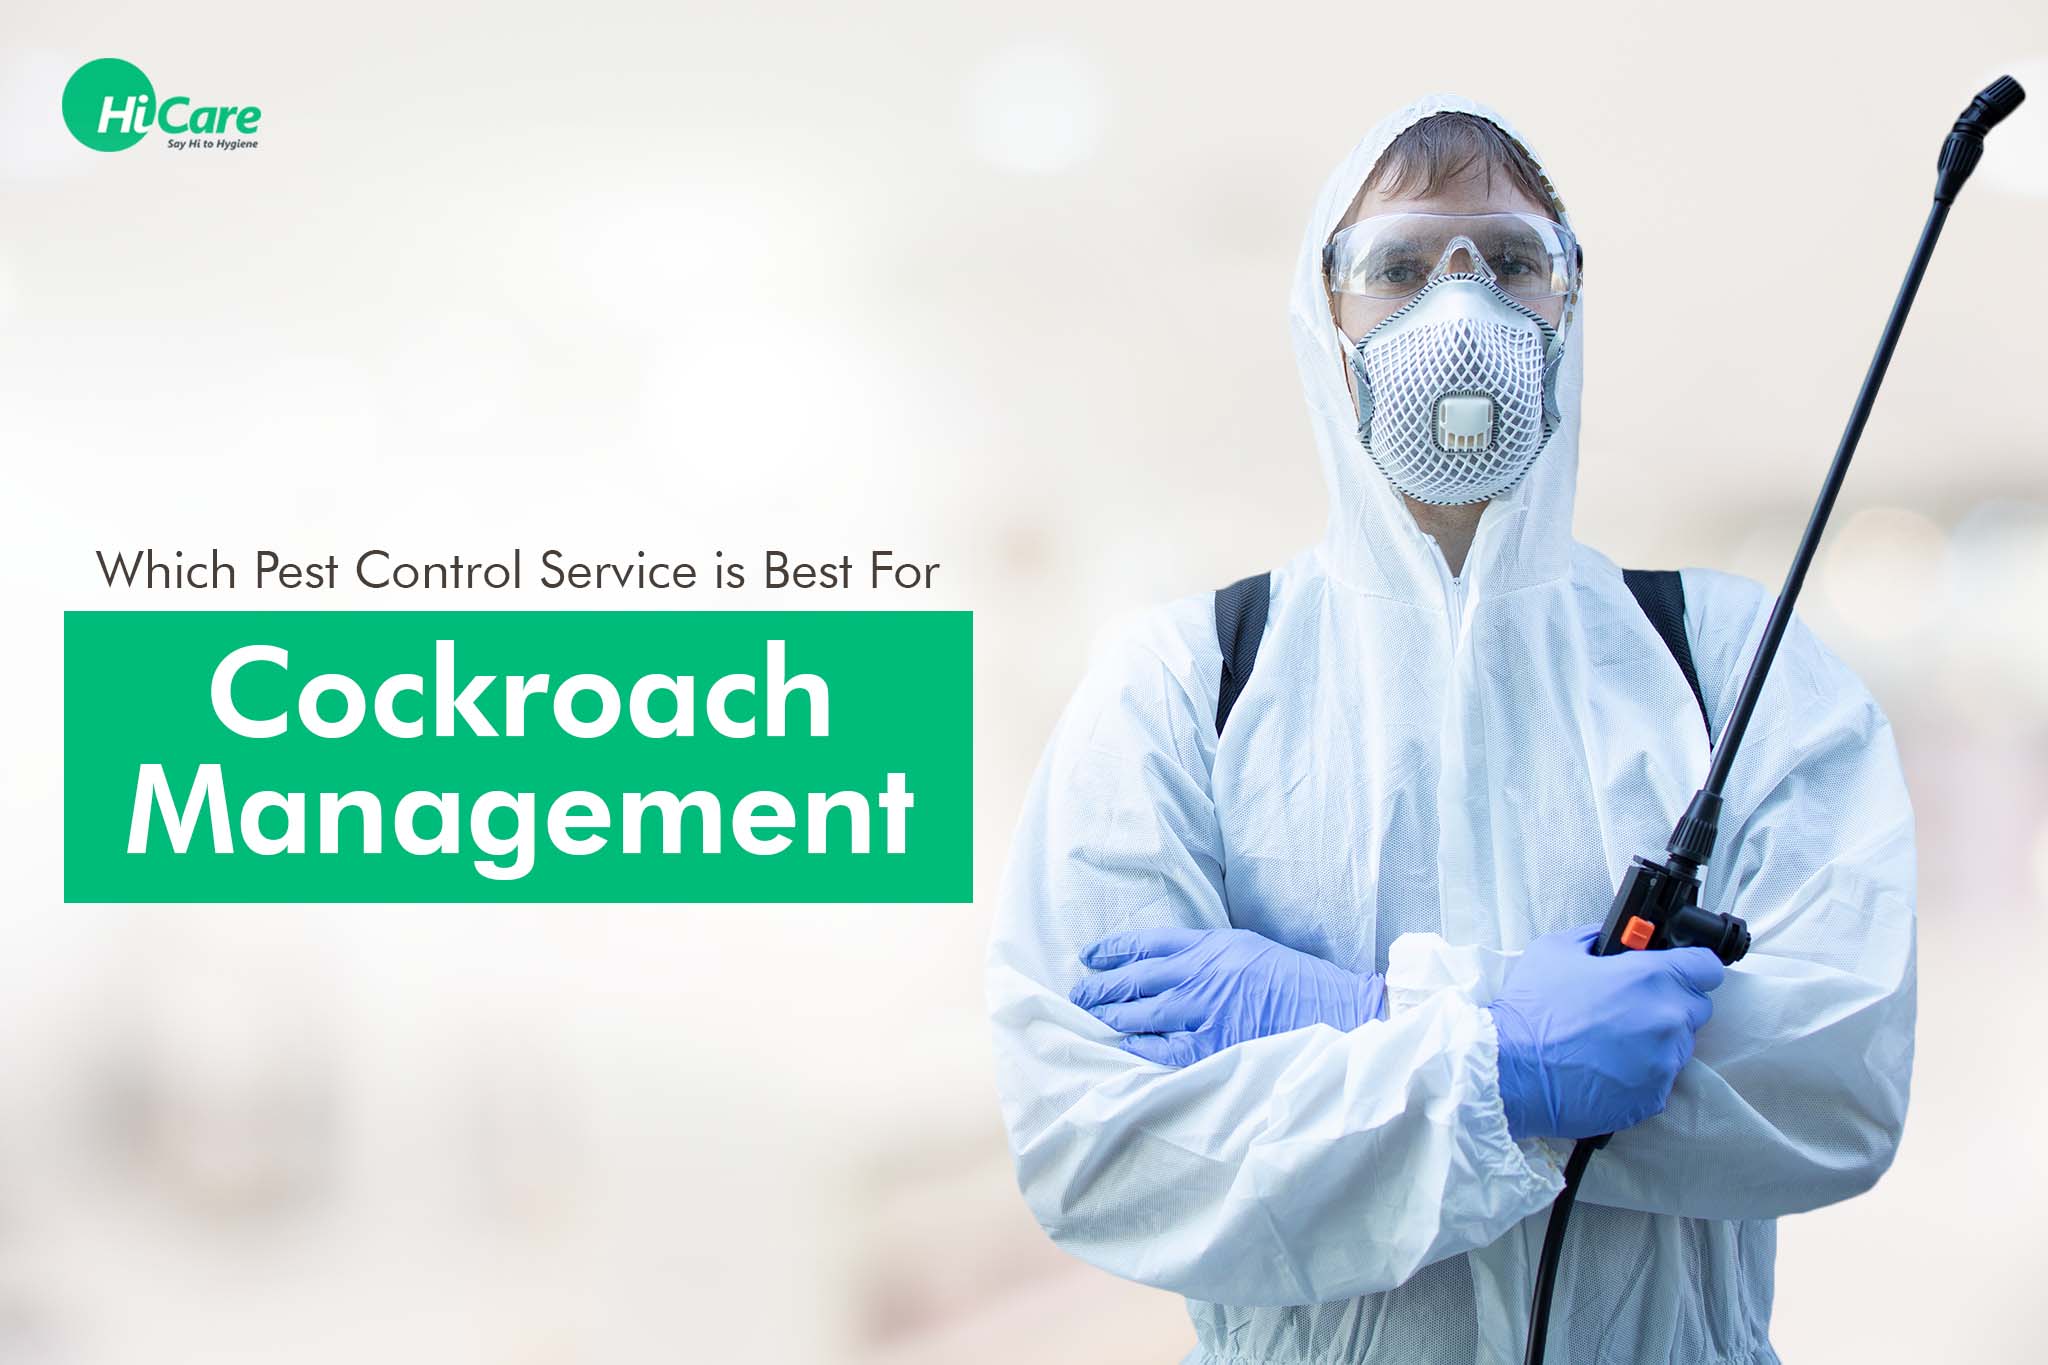 Which Pest Control Service is Best for Cockroach Management